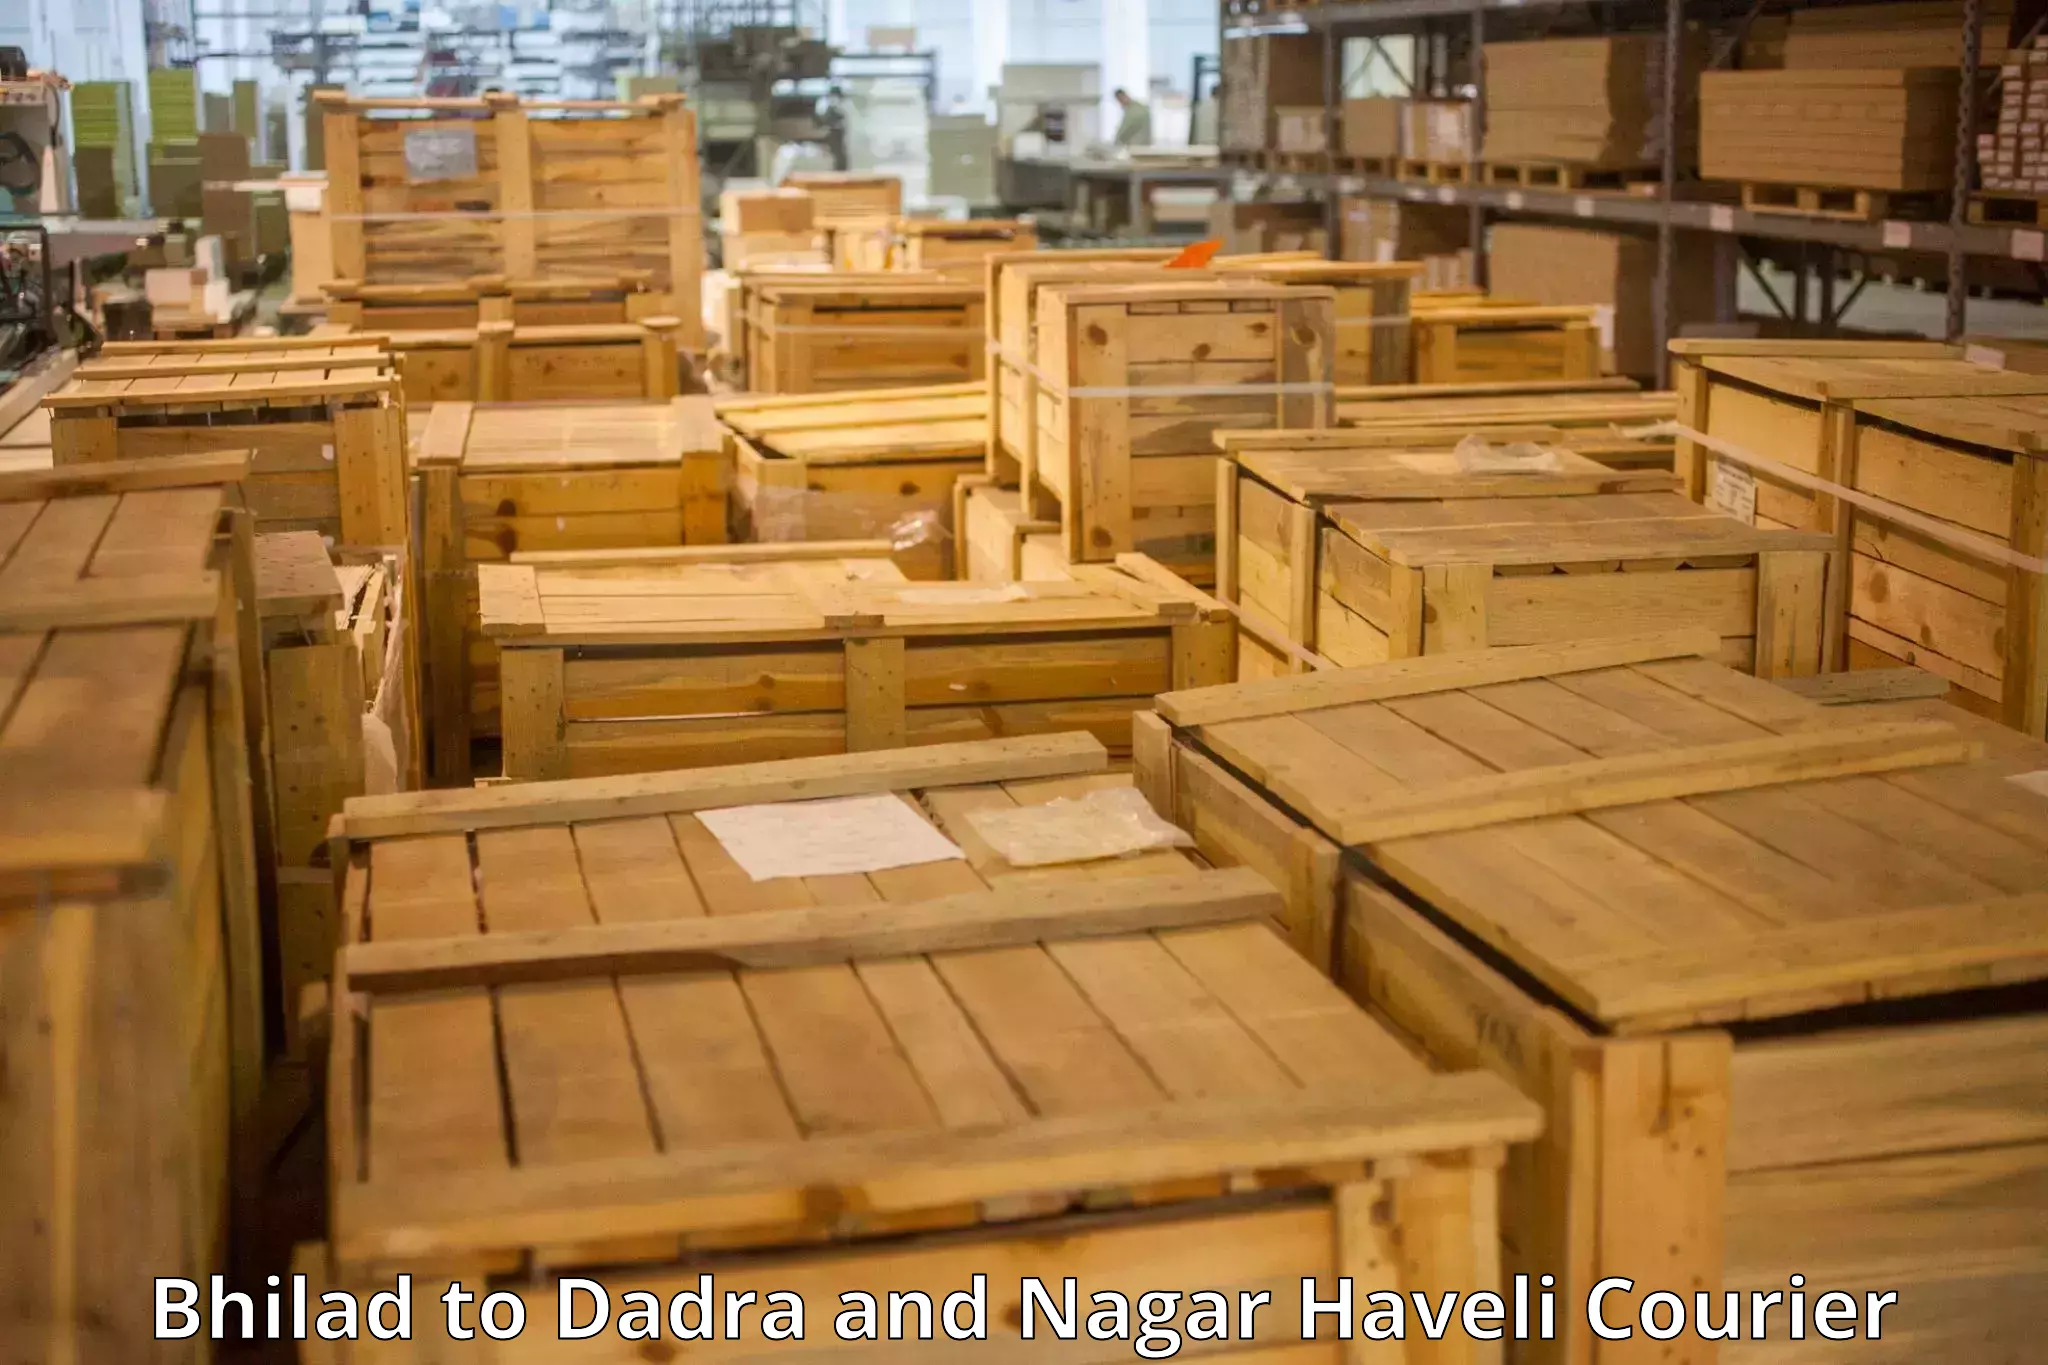 Luggage delivery system Bhilad to Dadra and Nagar Haveli